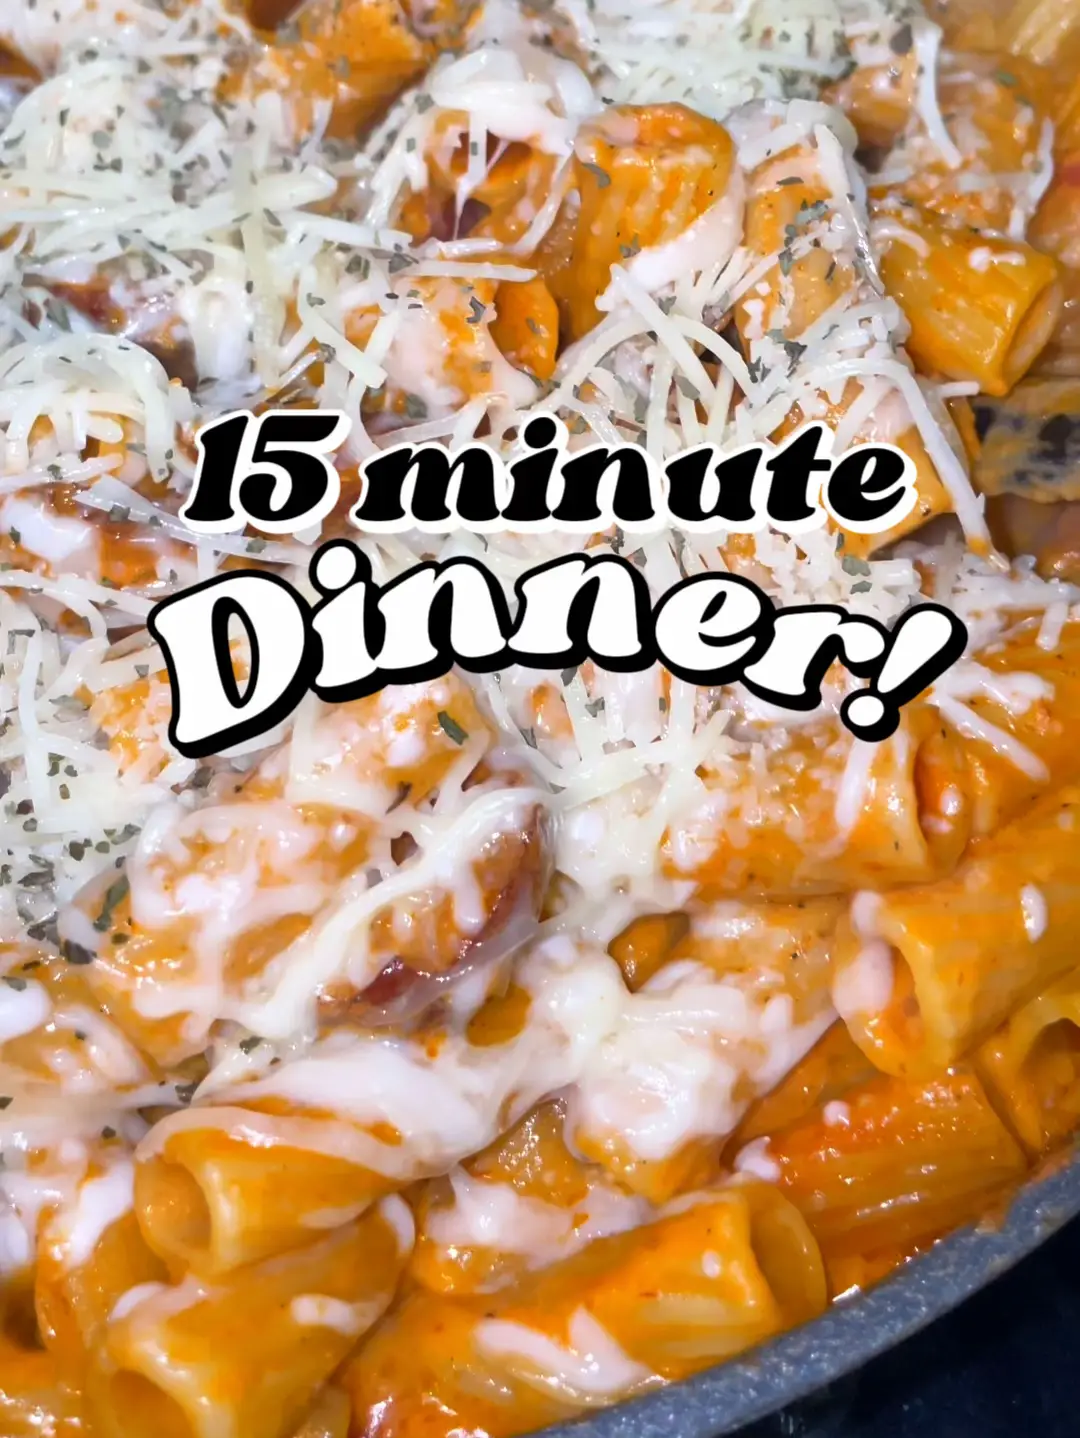 50 Pasta Aesthetic Dishes From An Elegant Dinner To A Cozy Meal : Spicy  Penne Pasta 1 - Fab Mood